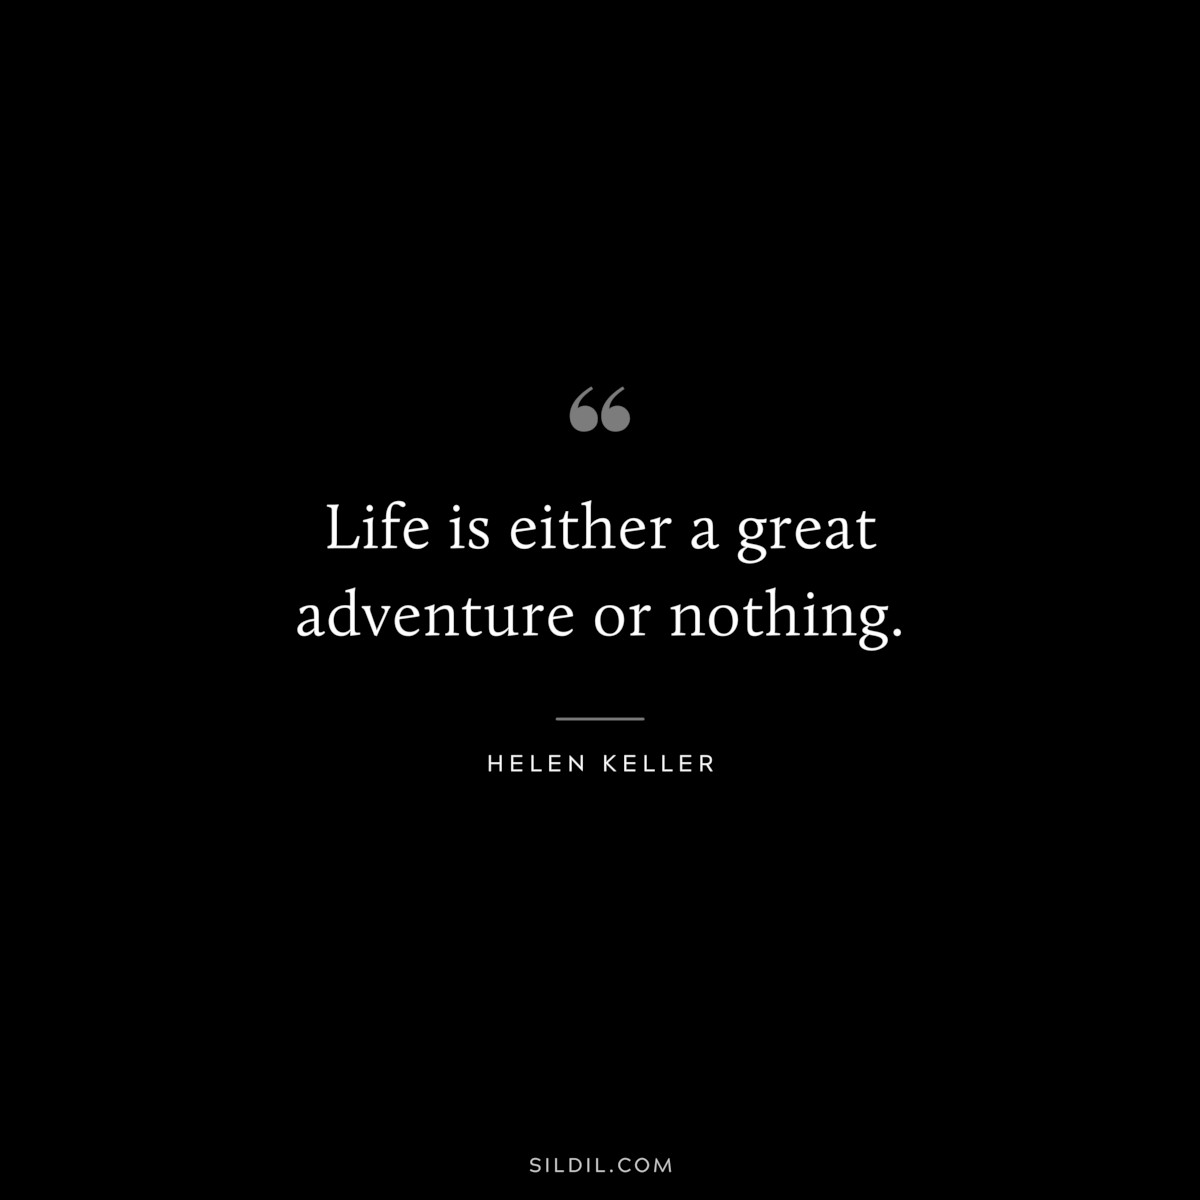 Life is either a great adventure or nothing. ― Helen Keller